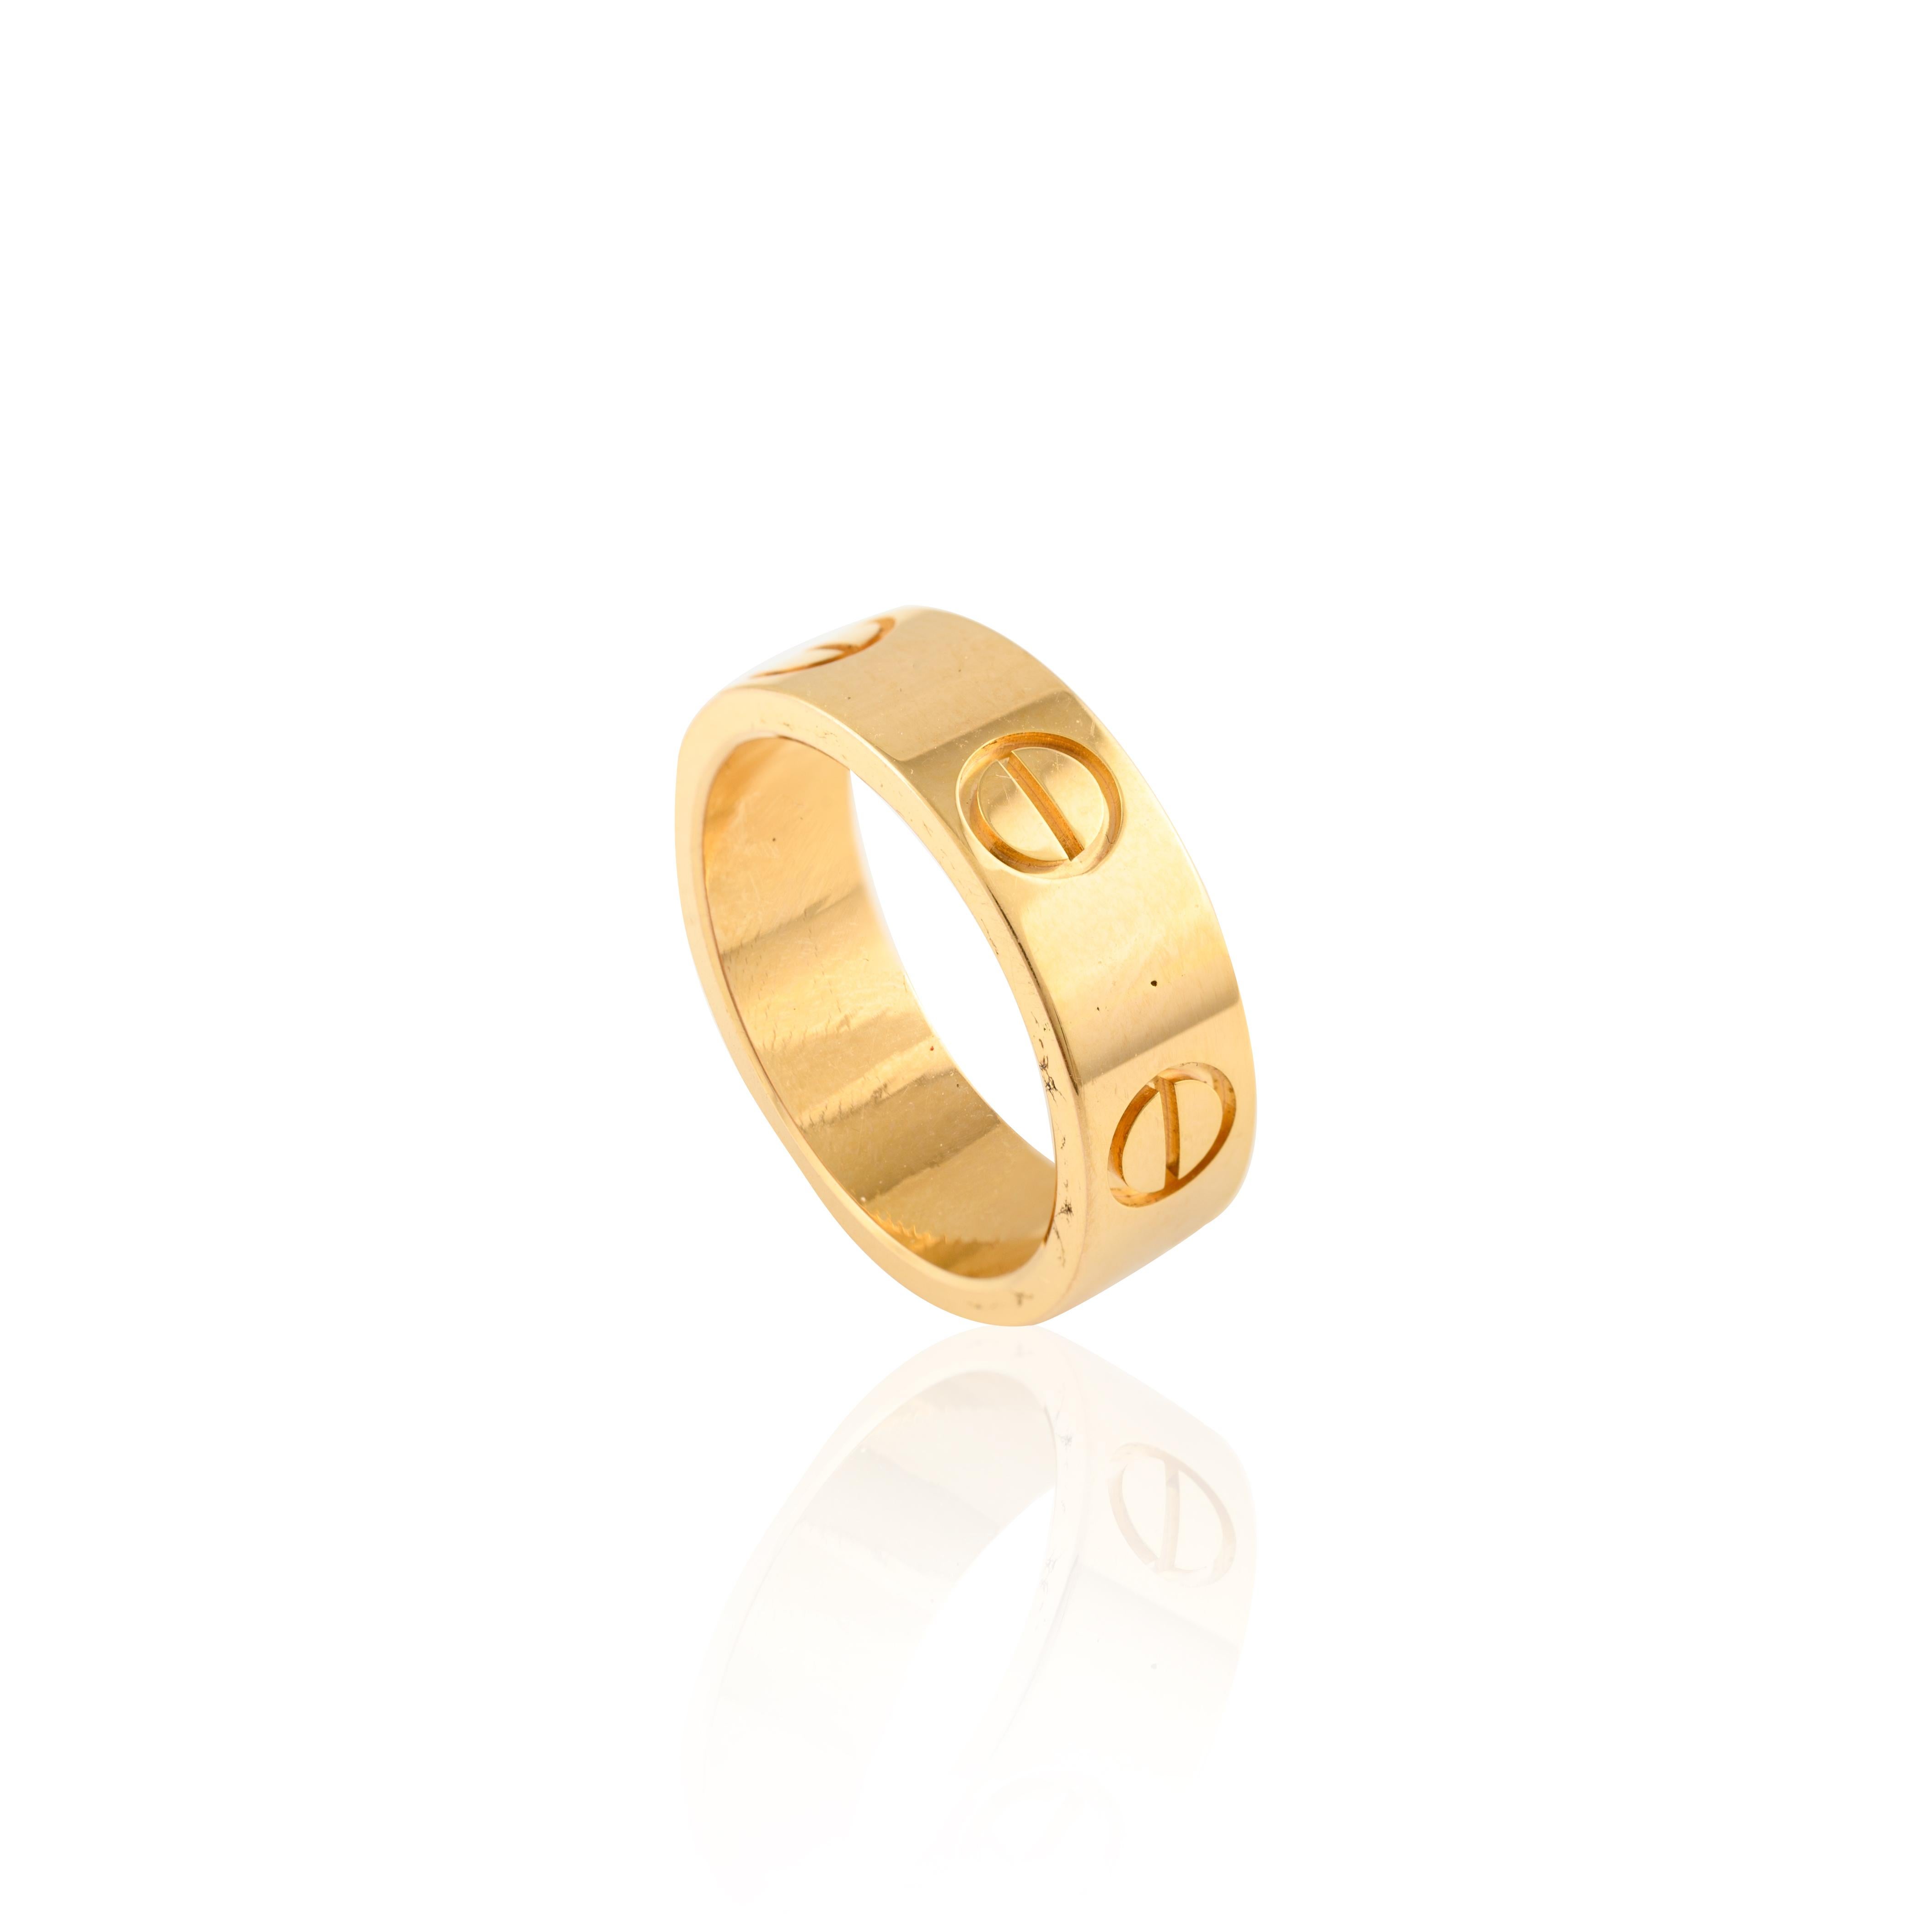 For Sale:  Fine Jewelry 14k Solid Yellow Gold Screw Engraved Love Band Ring 5